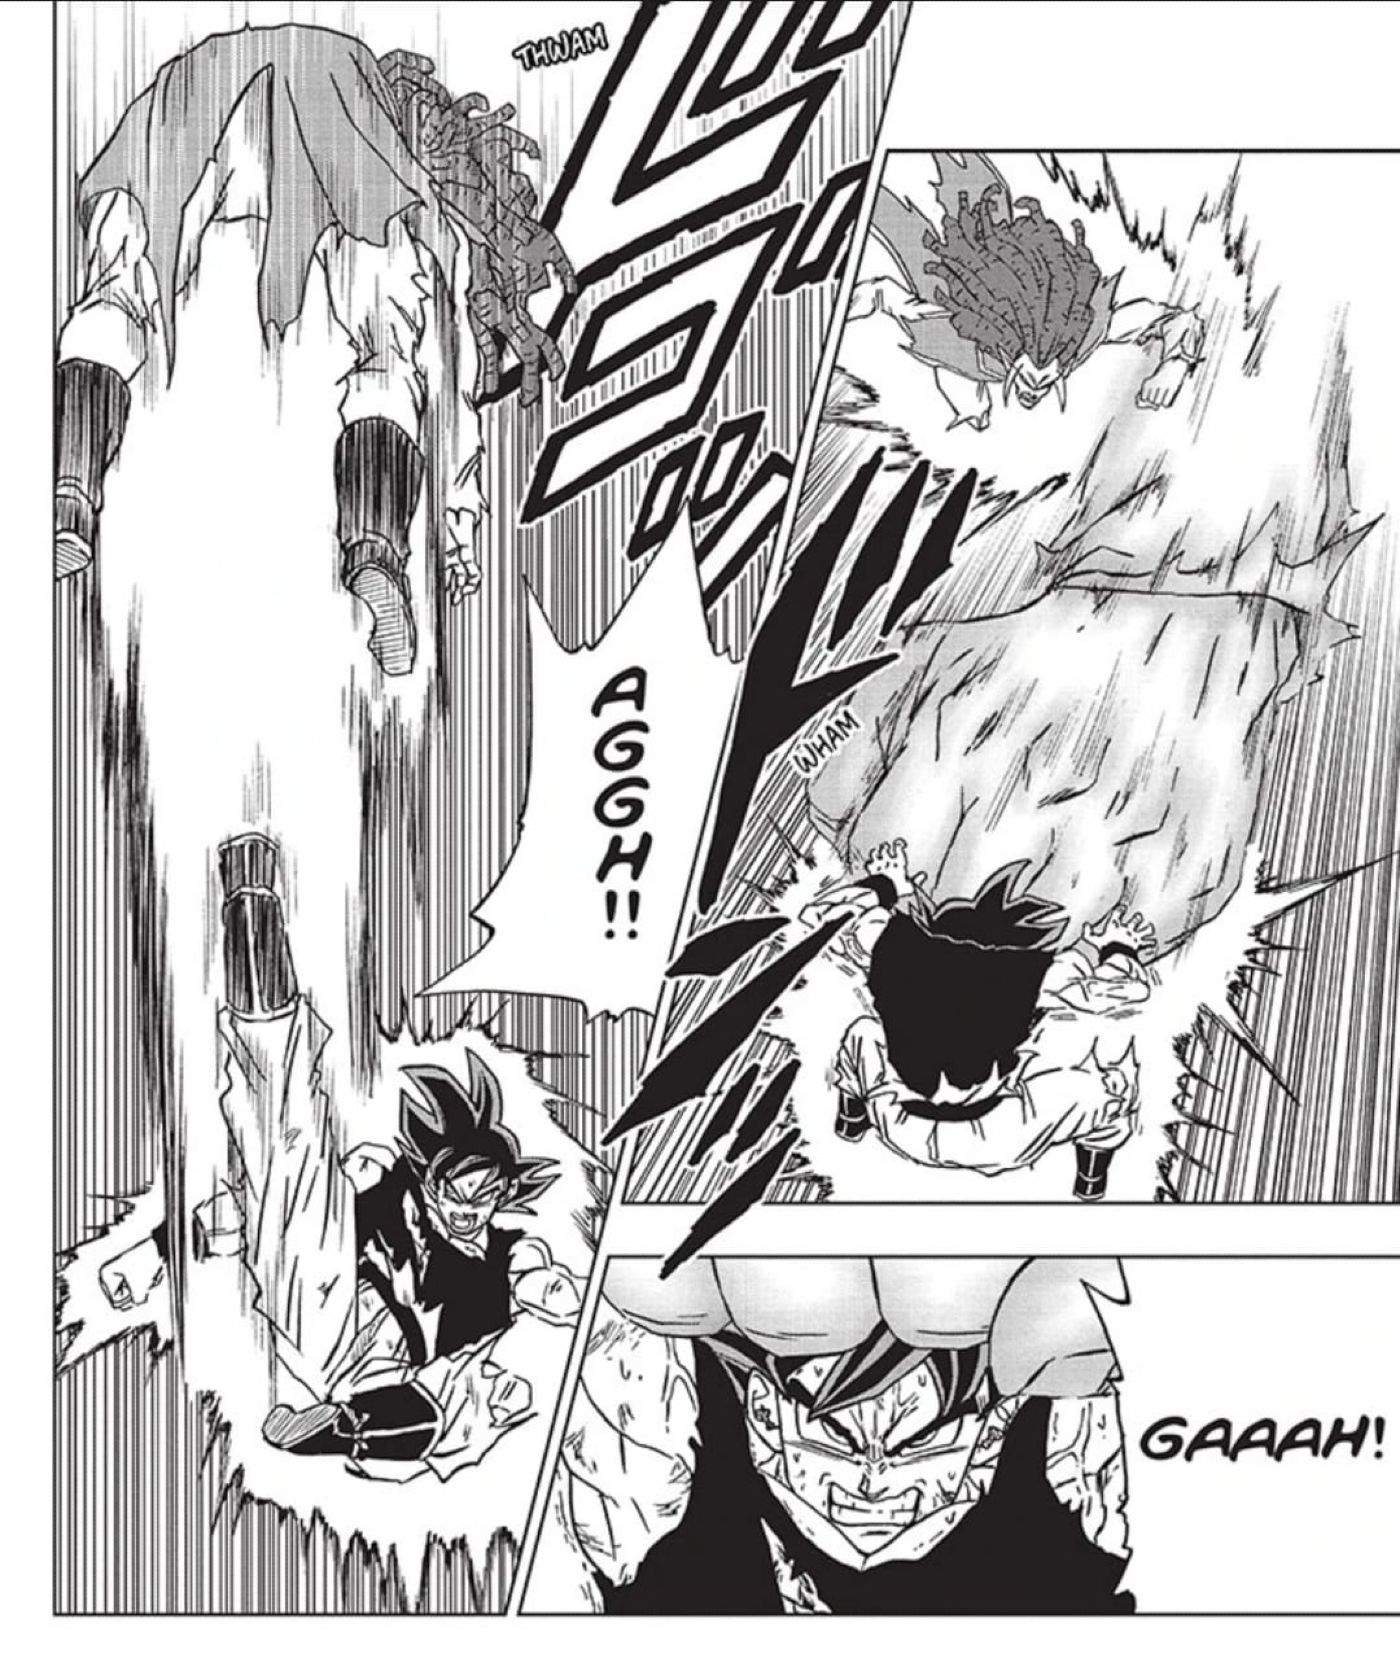 Goku projects energy from his body against Gas